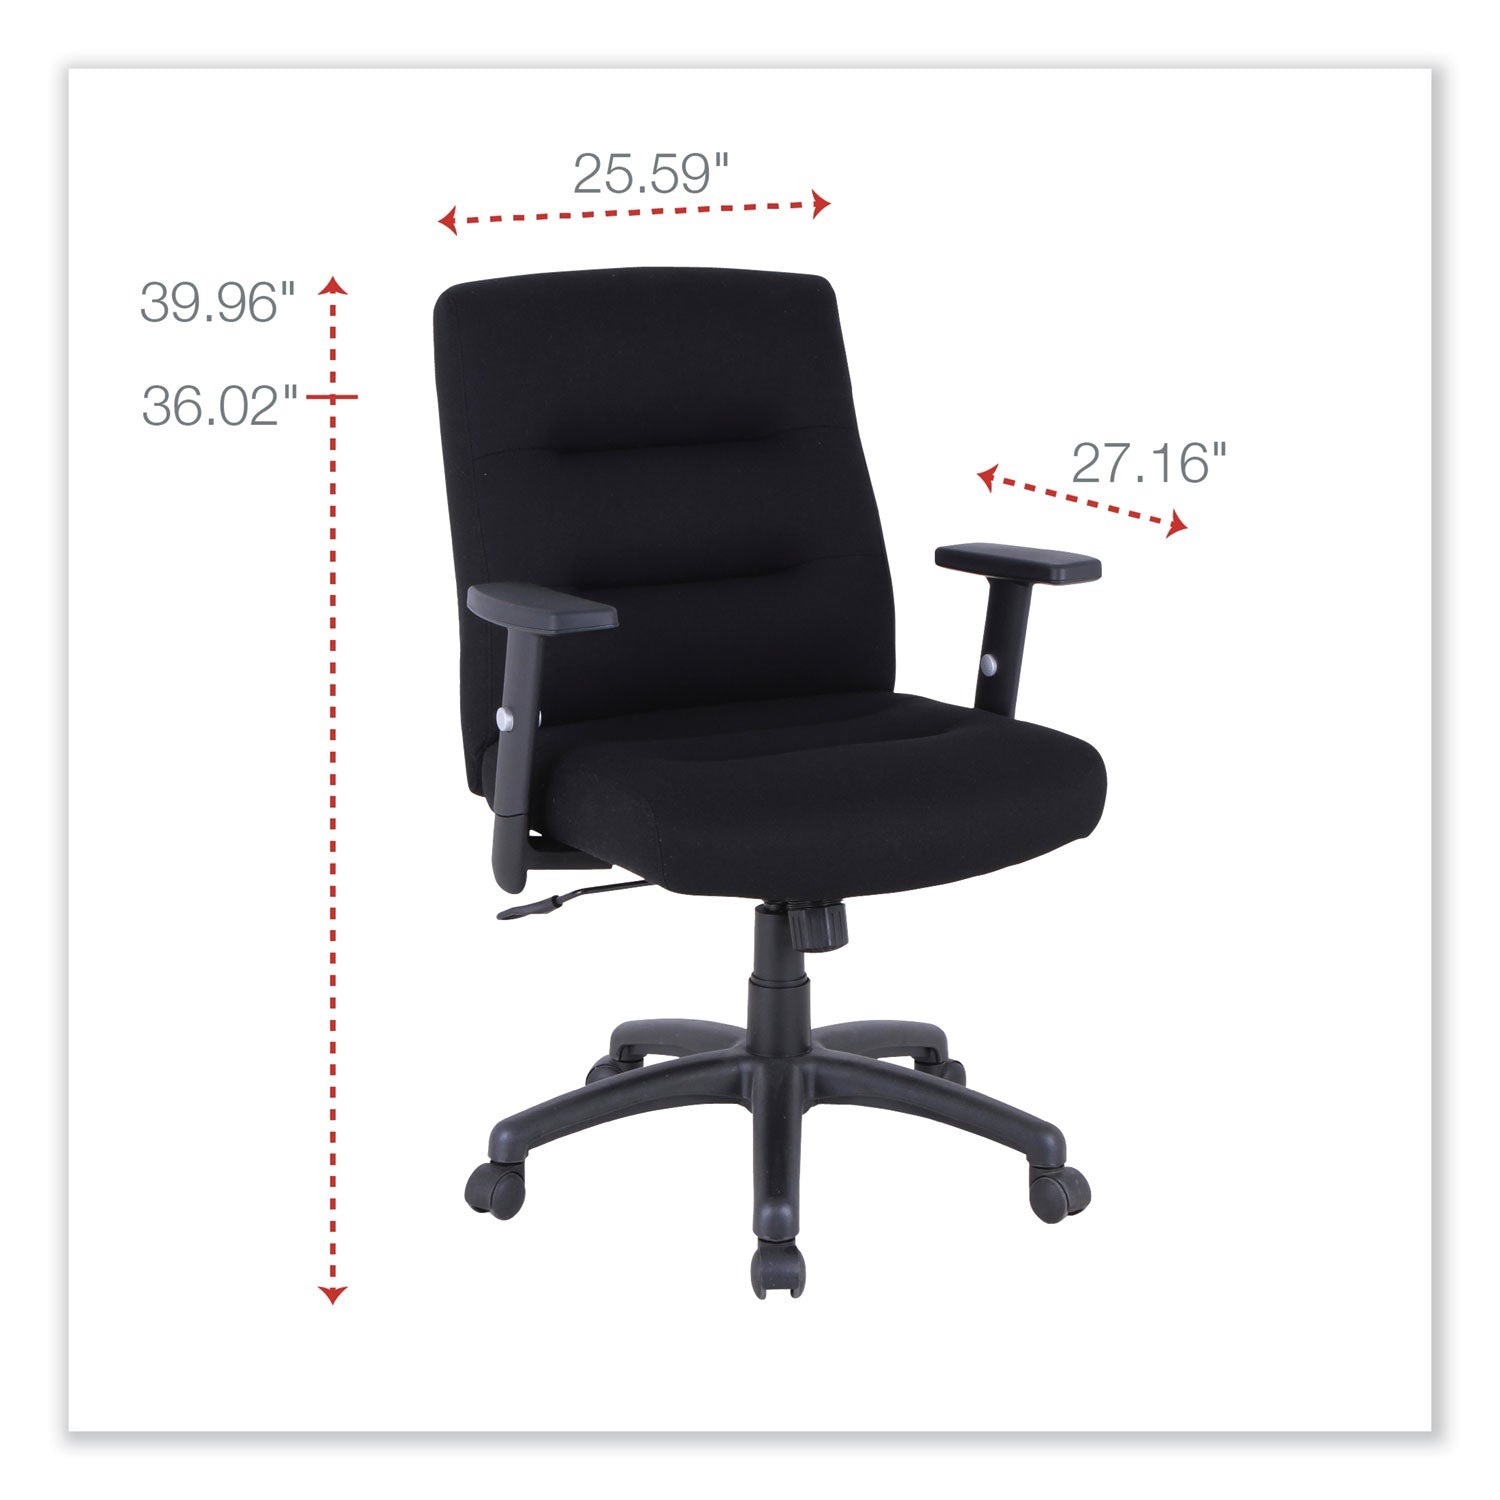 alera-kesson-series-petite-office-chair-supports-up-to-300-lb-1771-to-2165-seat-height-black_aleks4010 - 2